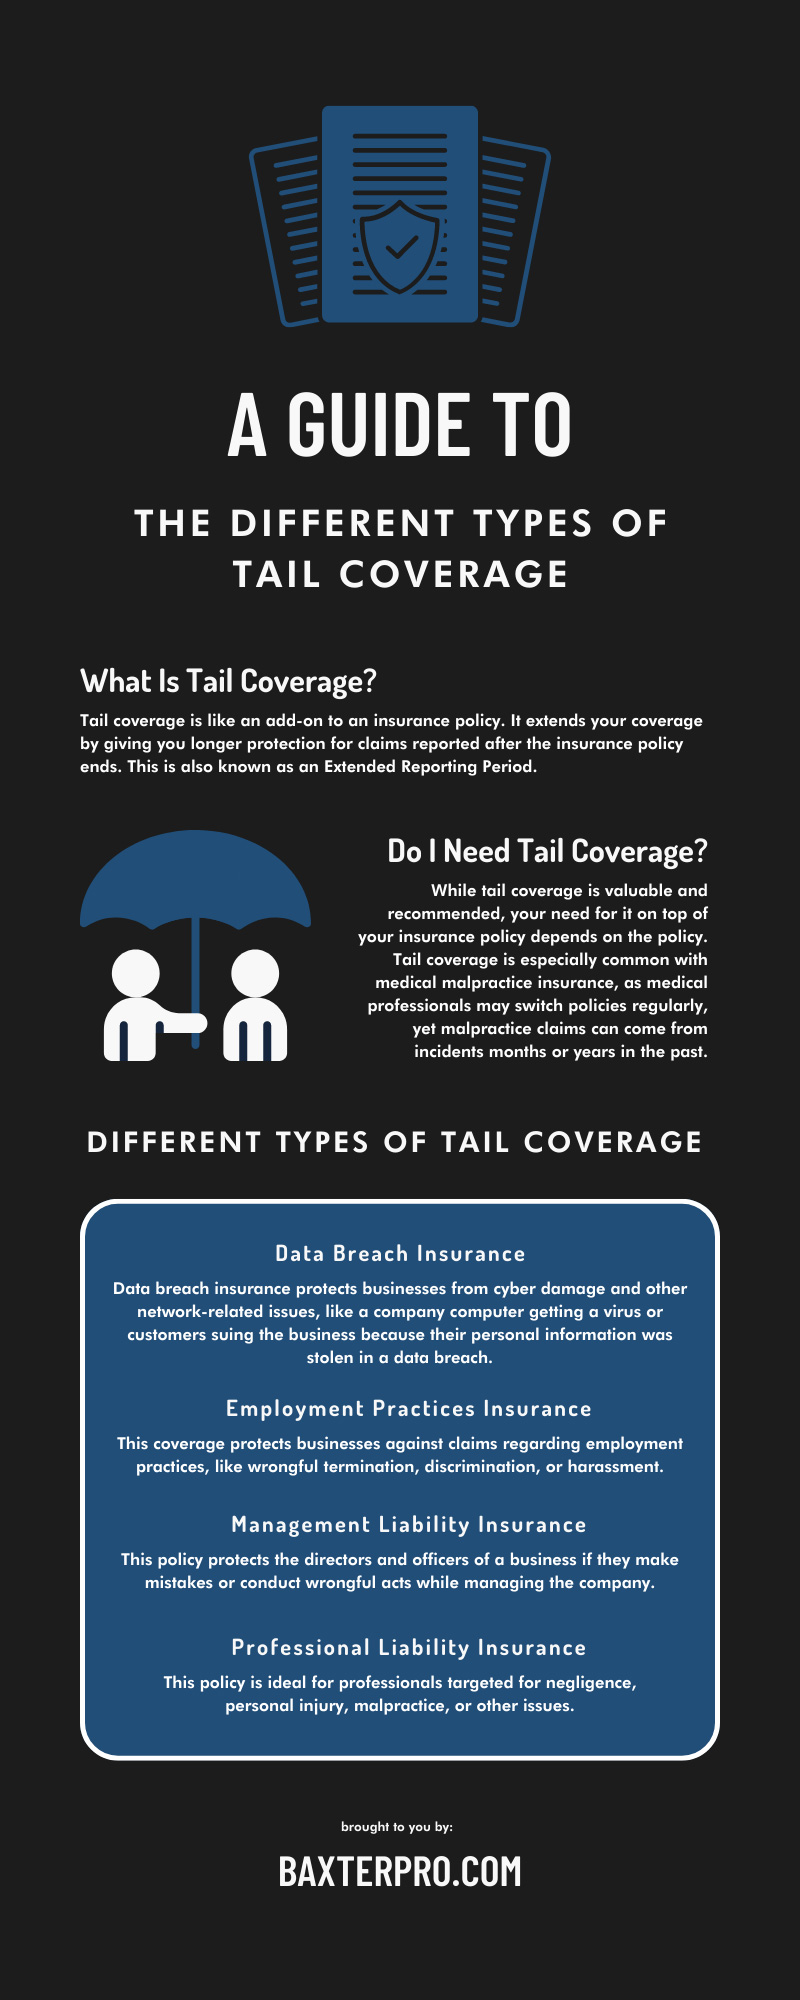 A Guide to the Different Types of Tail Coverage